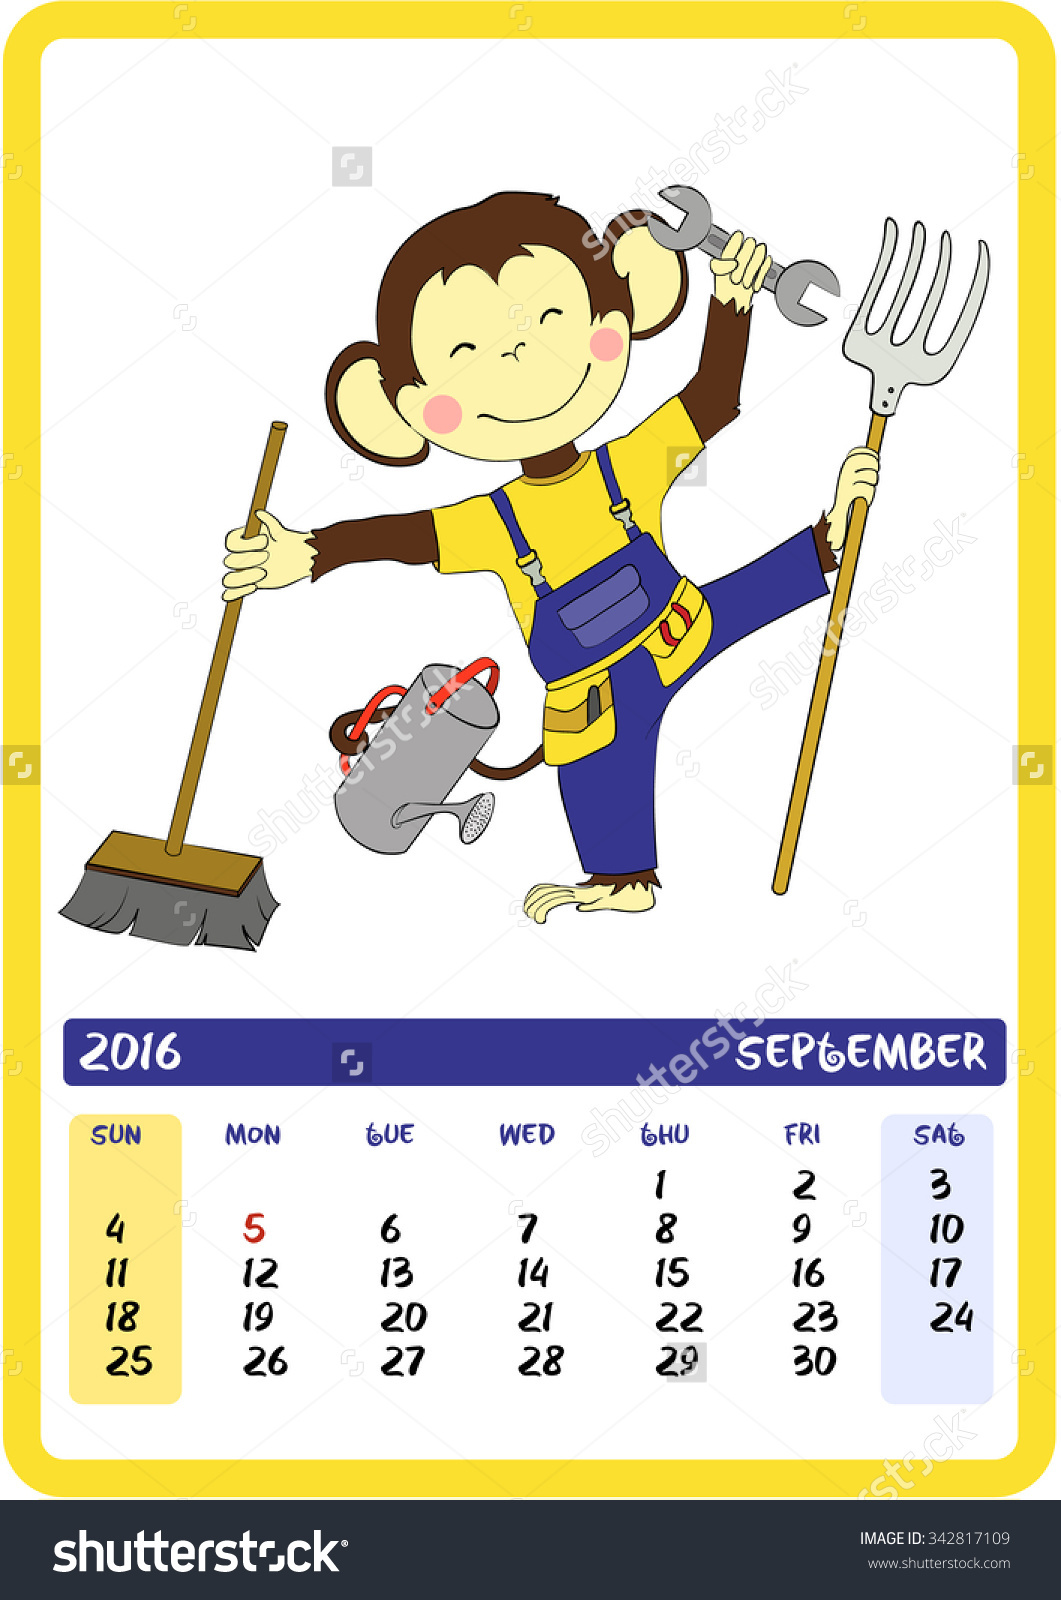 september labor day calendar clipart 20 free Cliparts Download images